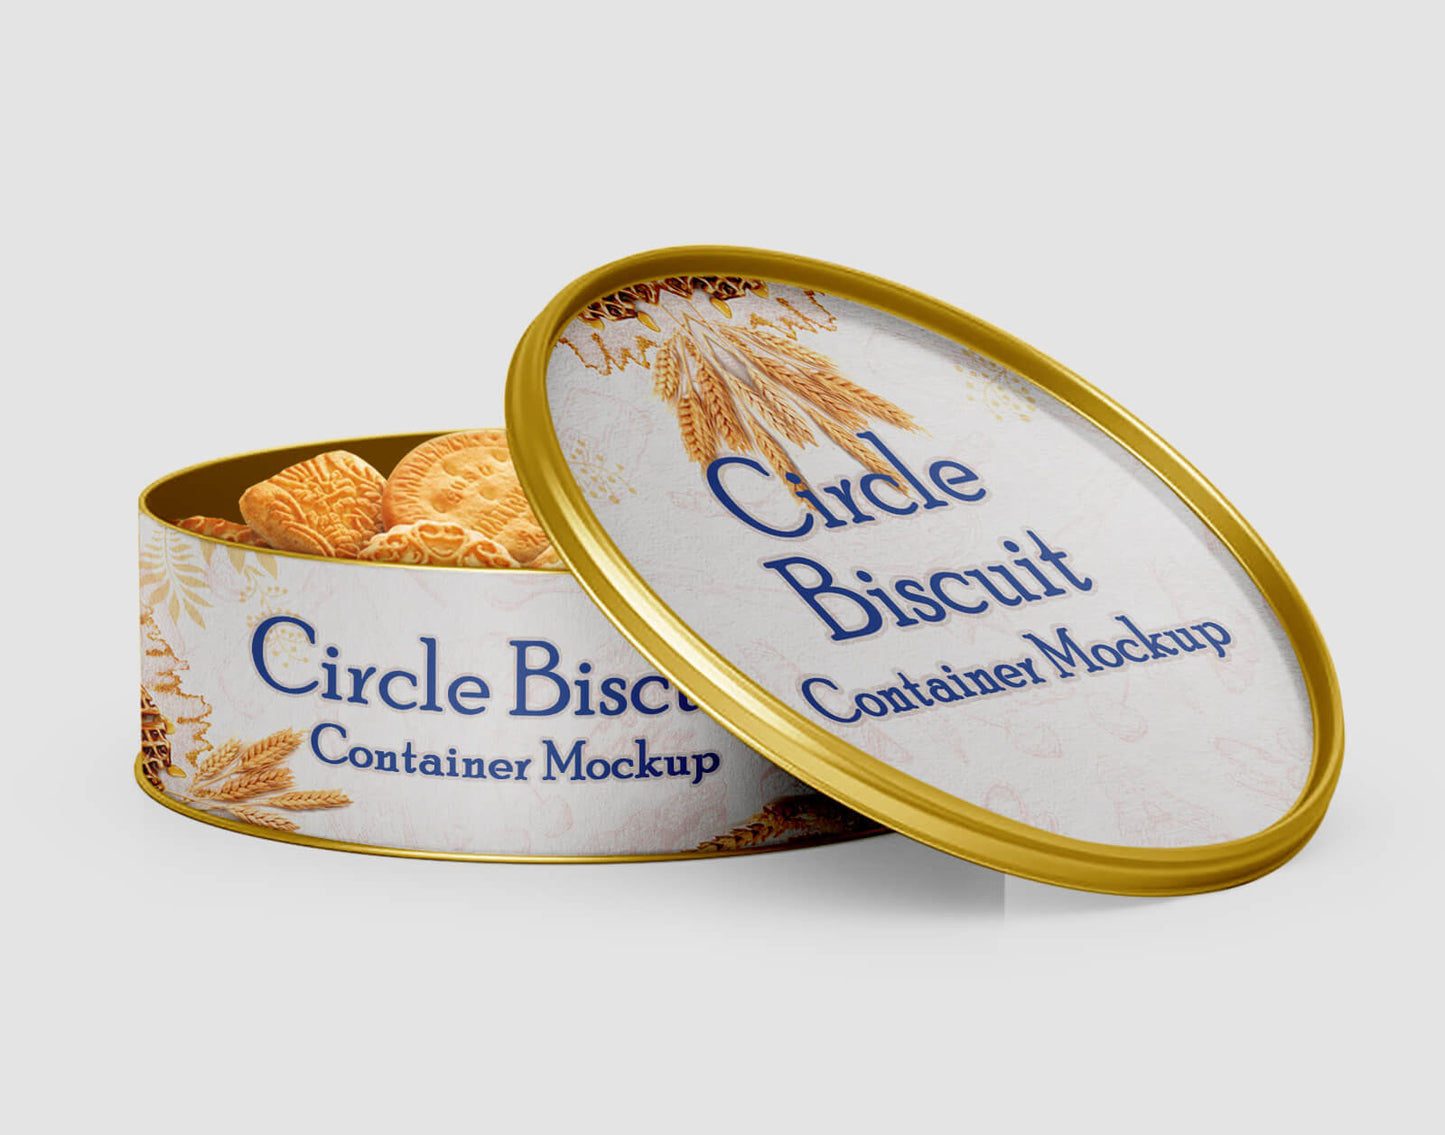 Free Circle Biscuit and Cookies Tin Container Mockups